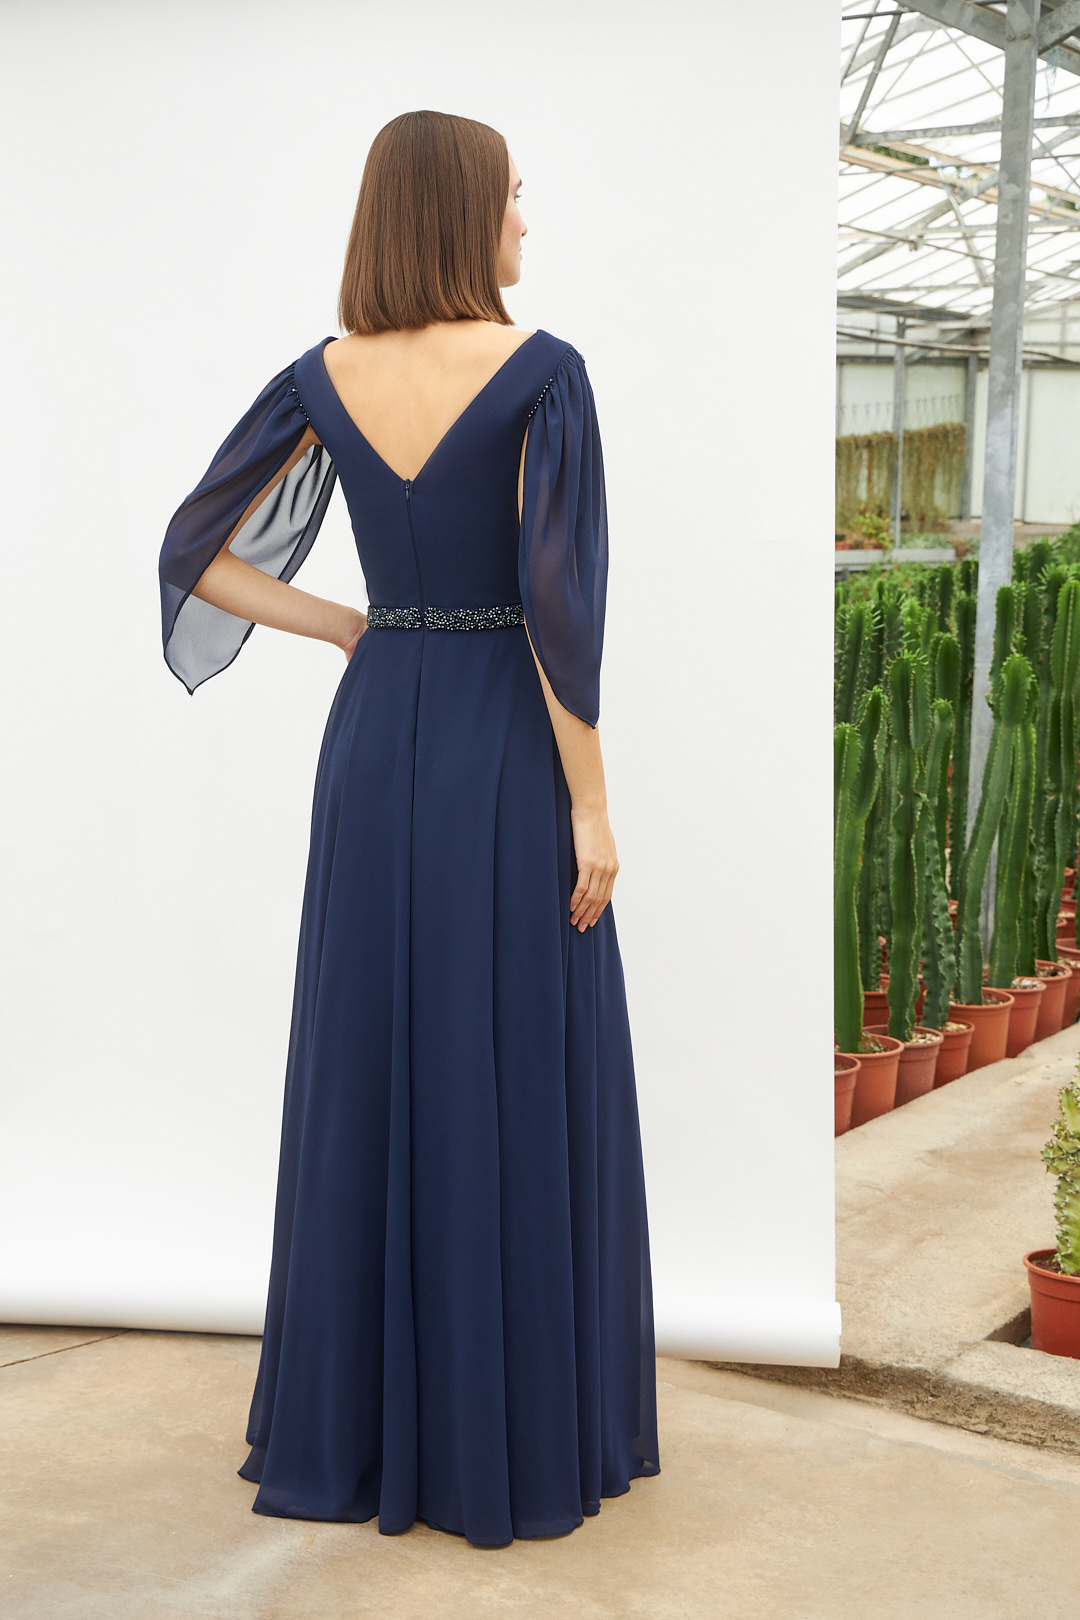 Classic Dresses / Long classic chiffon dress with beading at the waist and sleeves